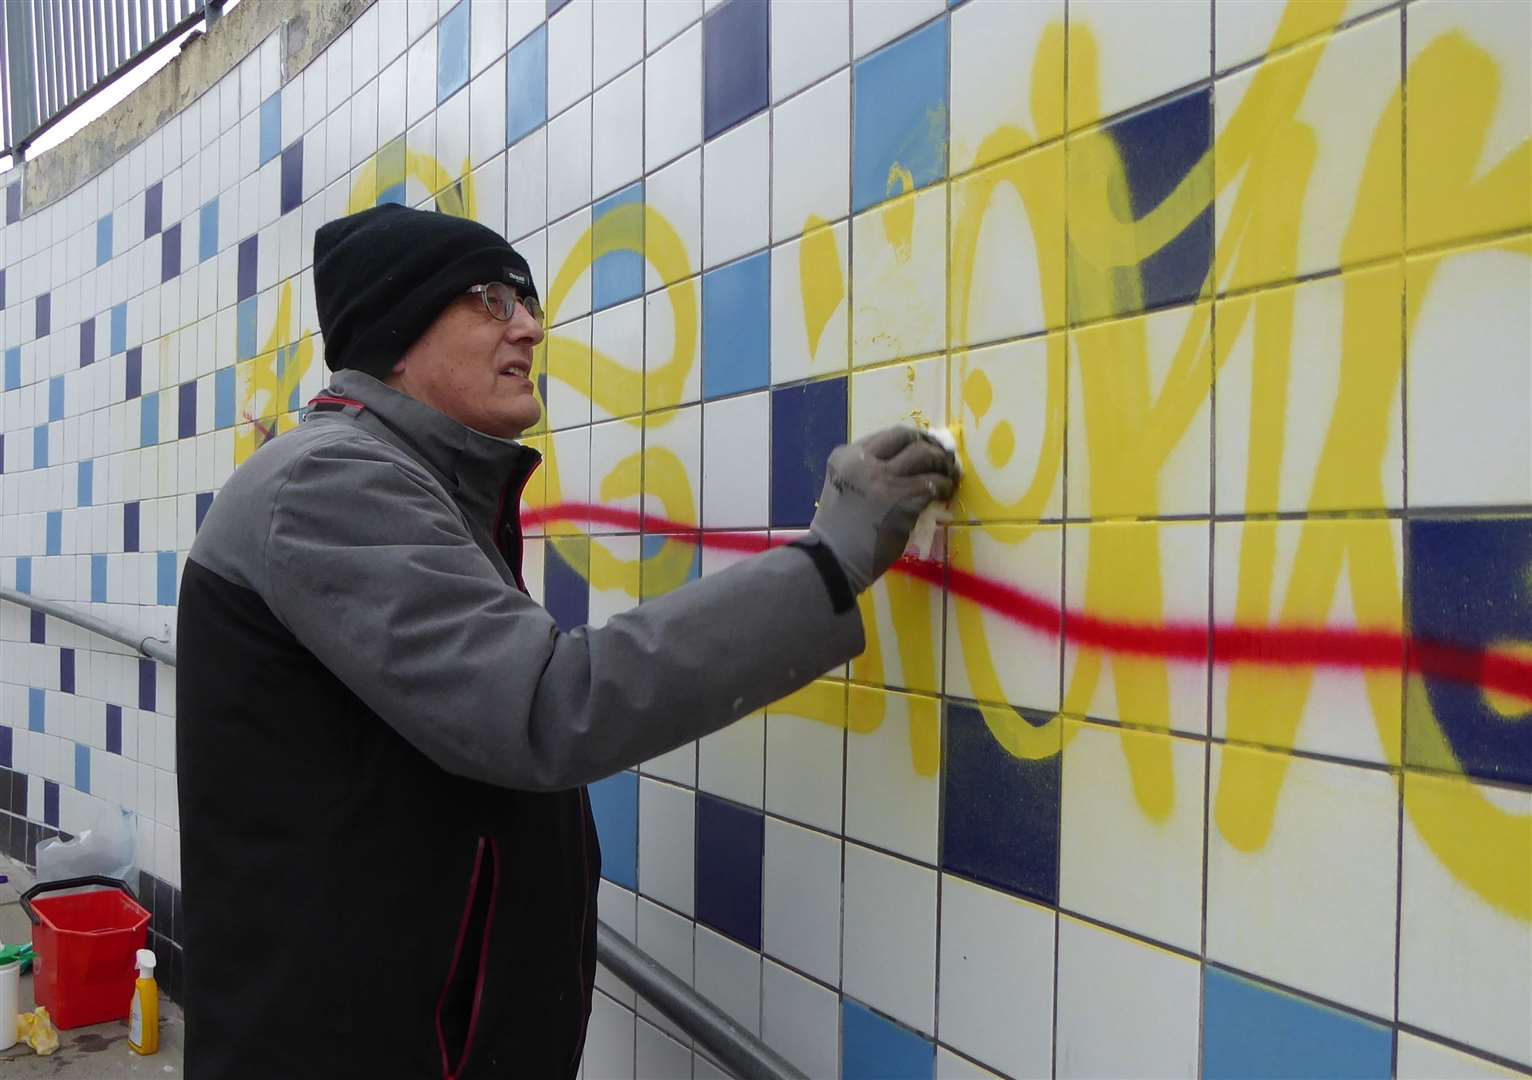 Derek Maslin helped clean the graffiti from new tiles in a Canterbury subway